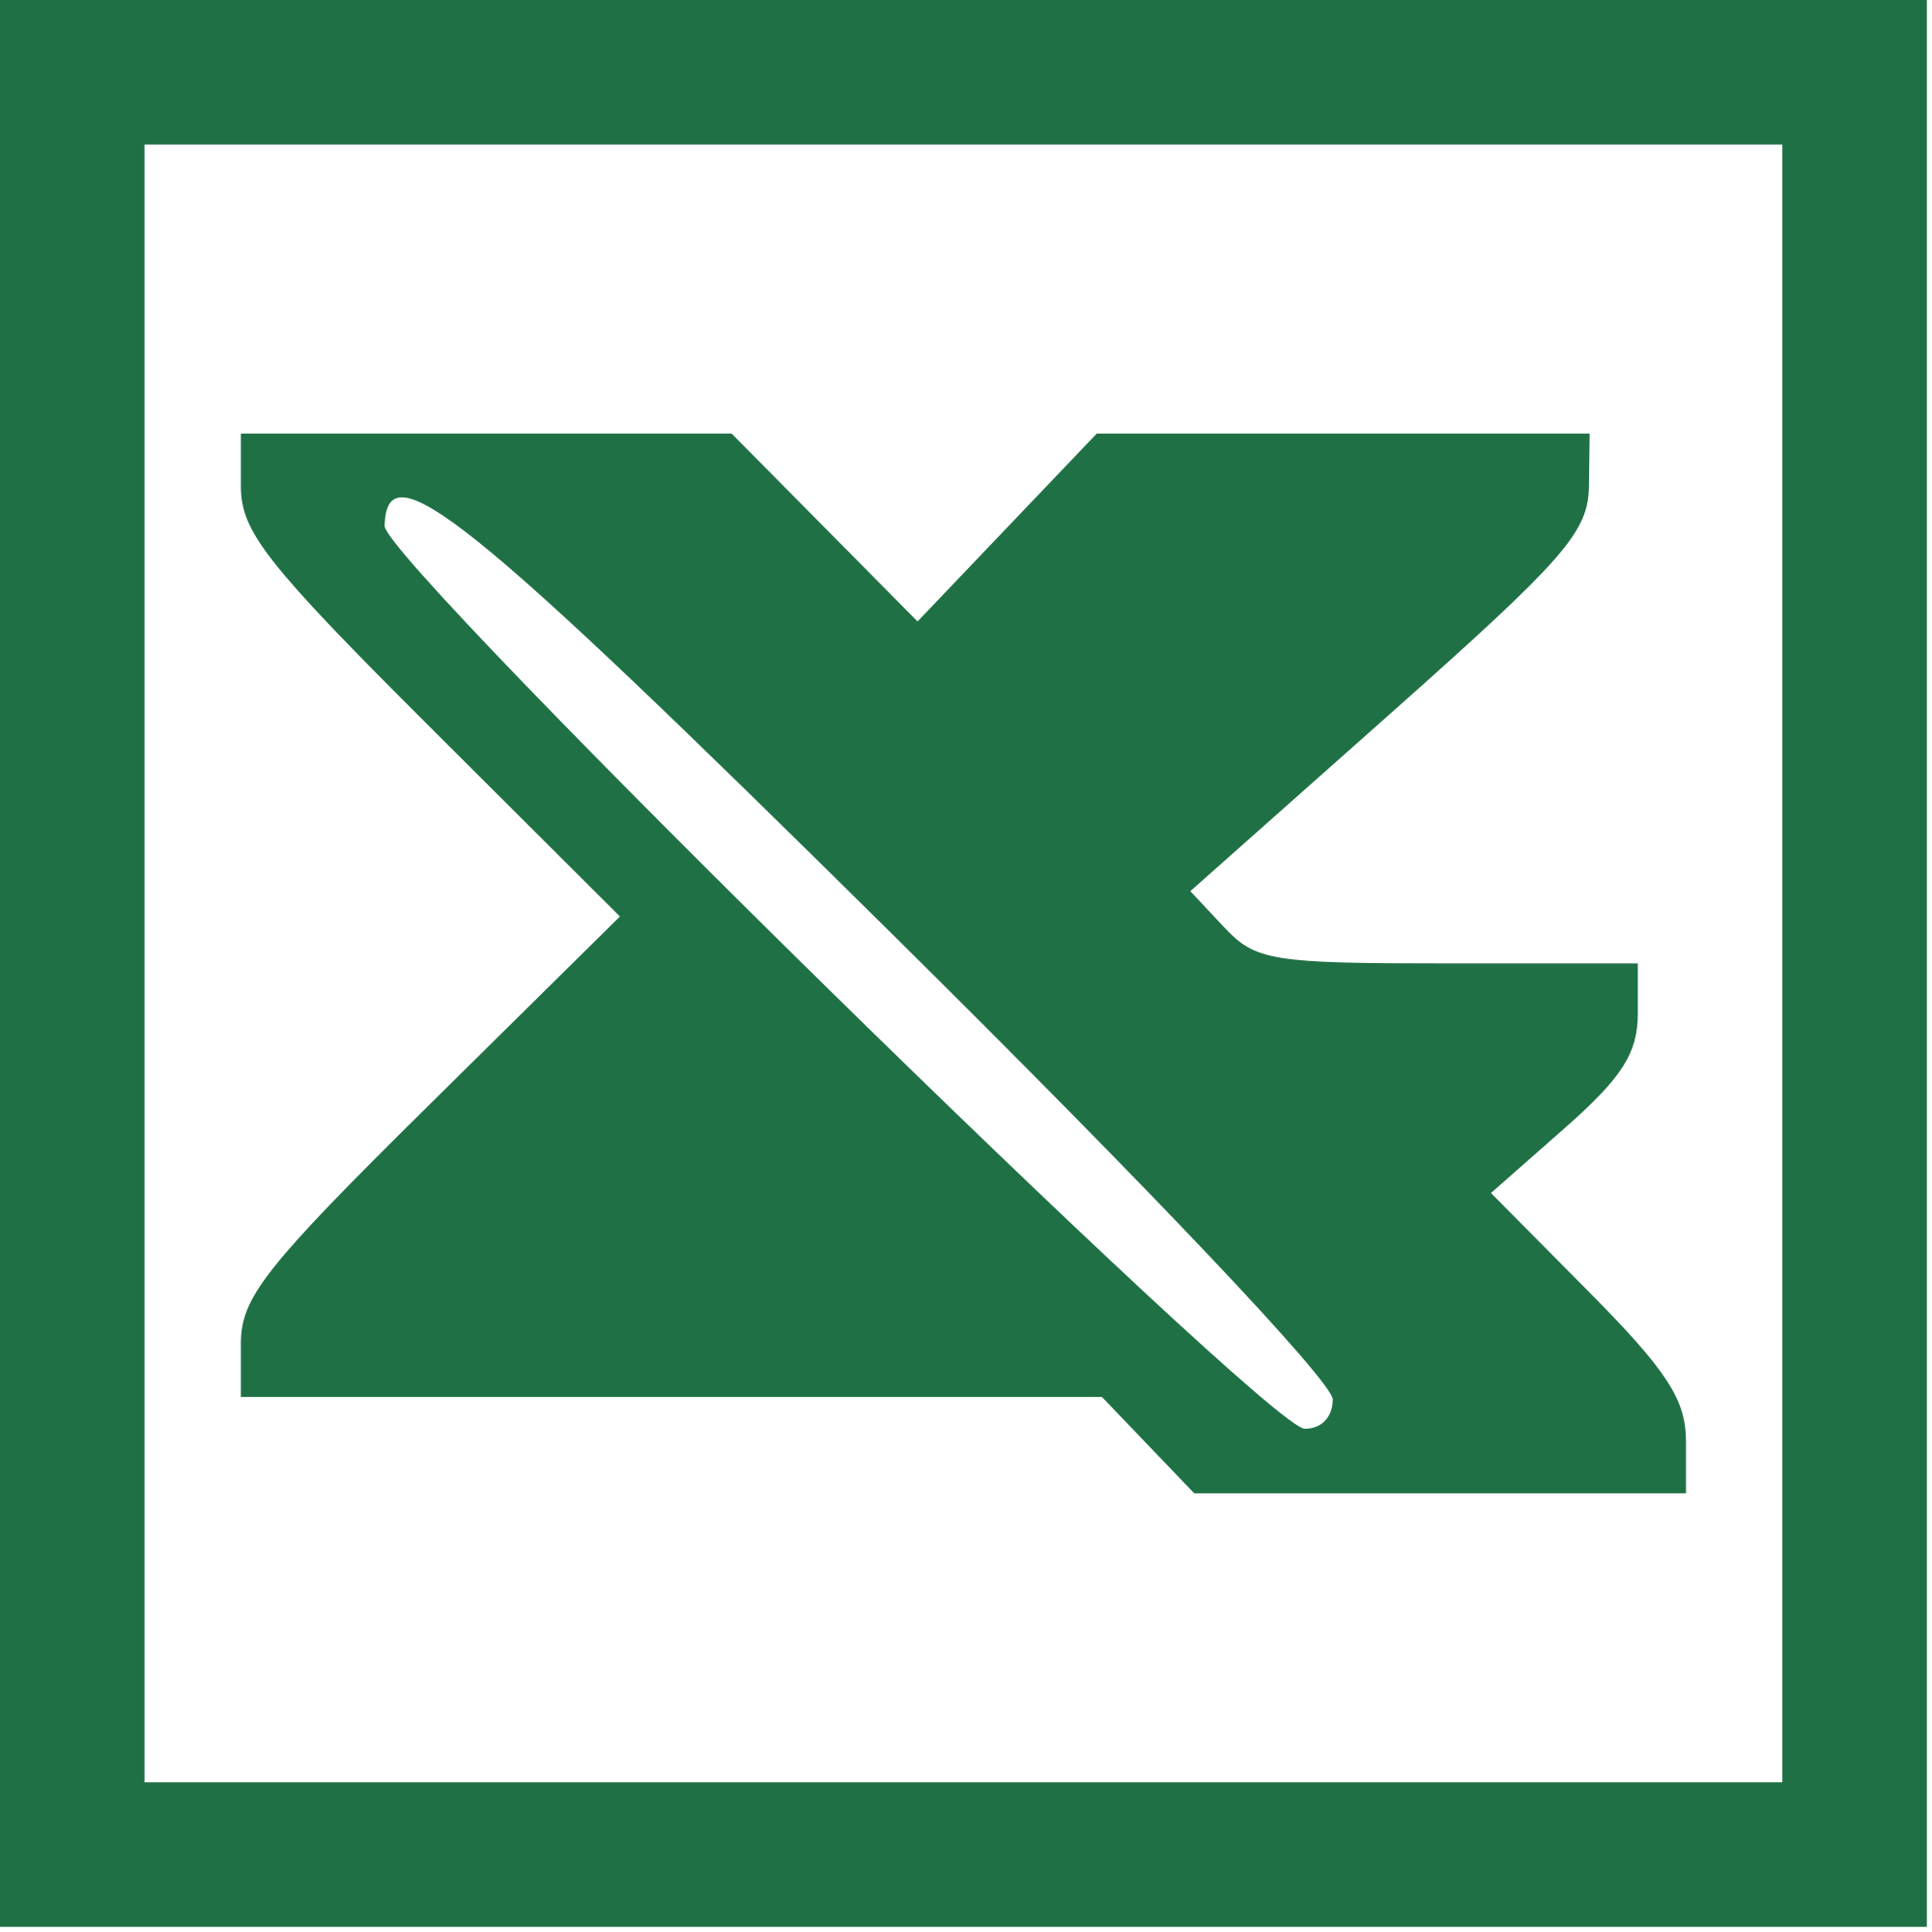 Microsoft Office Excel Logo - Microsoft Office Excel (2000–02).svg